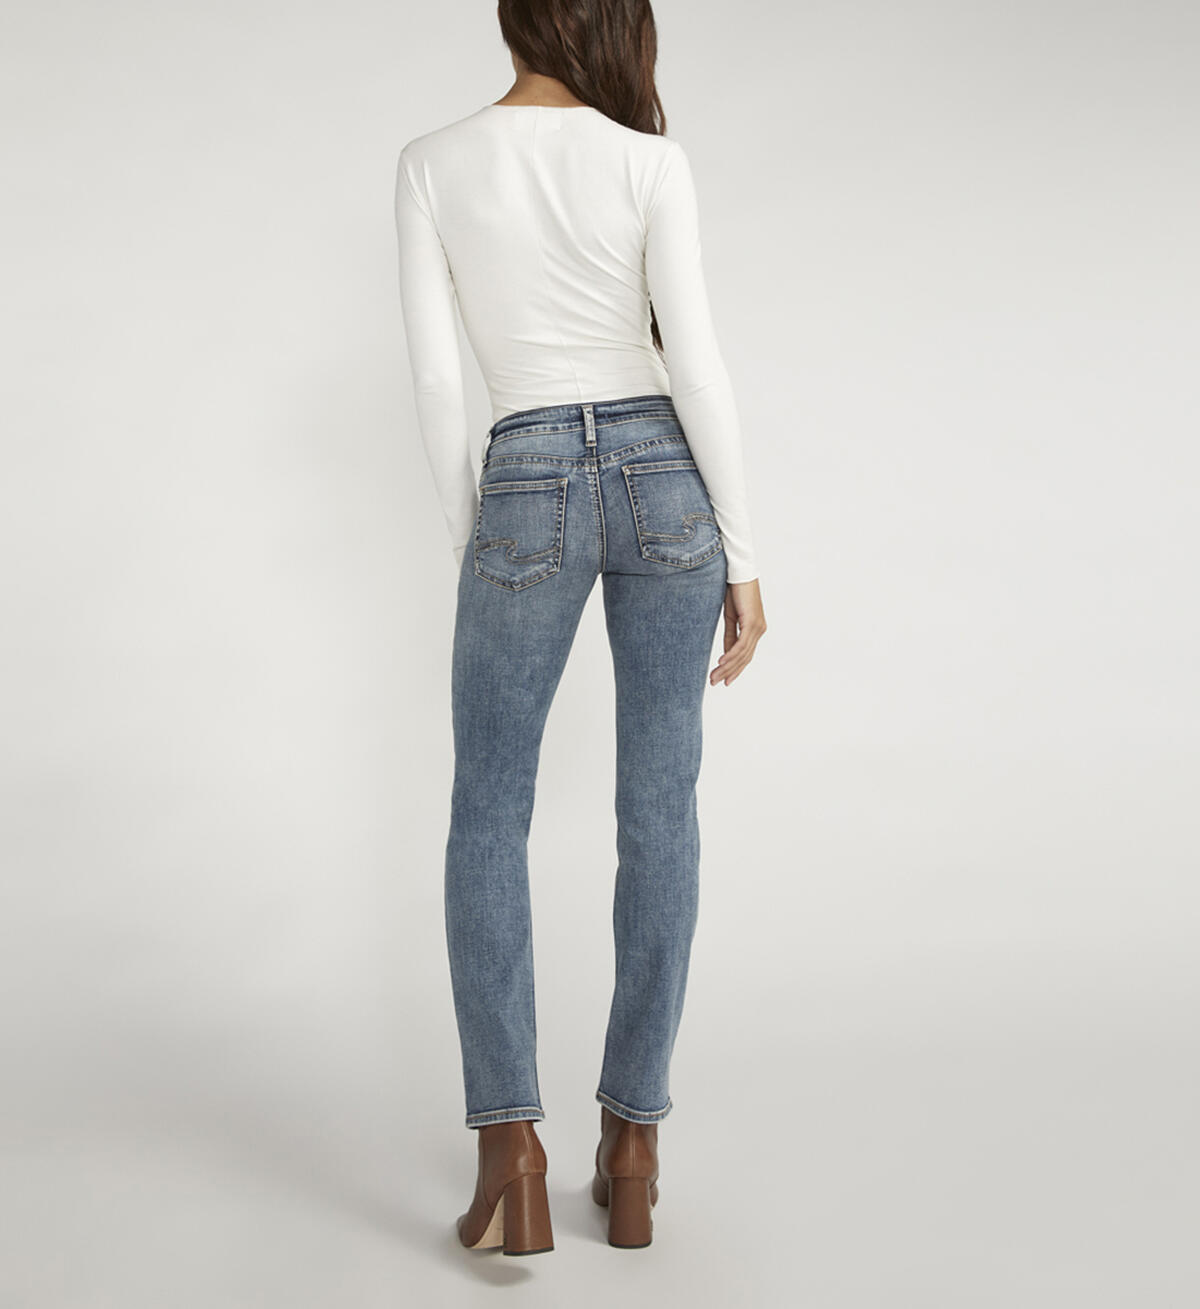 Tuesday Low Rise Straight Leg Jeans, Indigo, hi-res image number 1